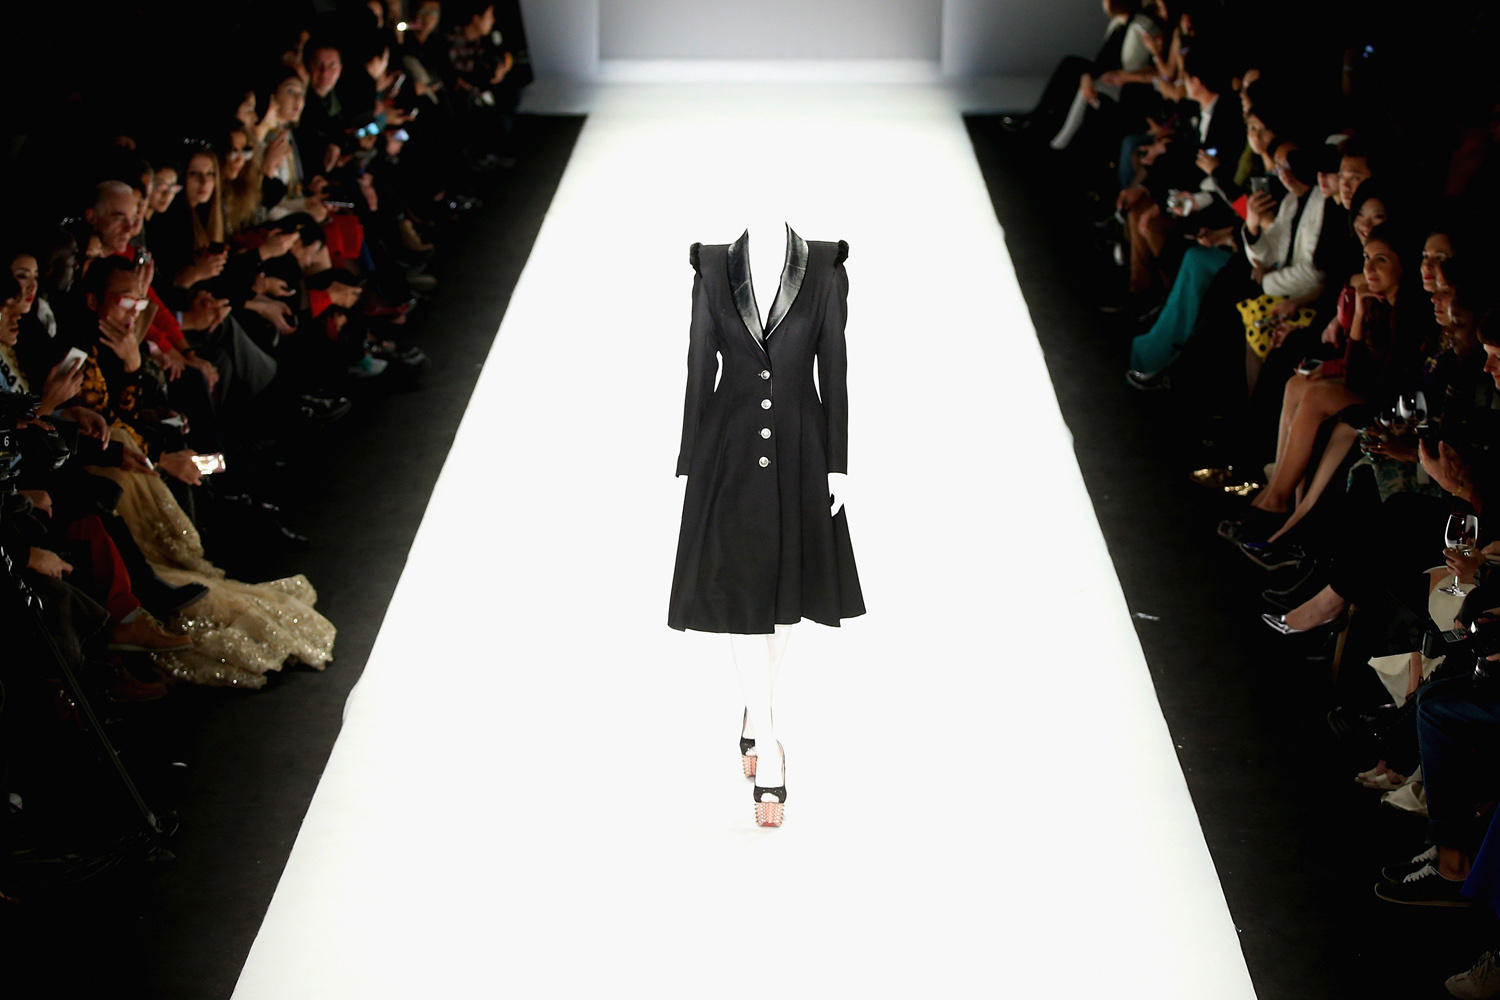 Oct. 29, 2013. An overexposed image shows a model showcasing designs on the runway at Hu Sheguang Haute Couture Collection show during Mercedes-Benz China Fashion Week Spring/Summer 2014 at 751 D-PARK Workshop in Beijing, China.